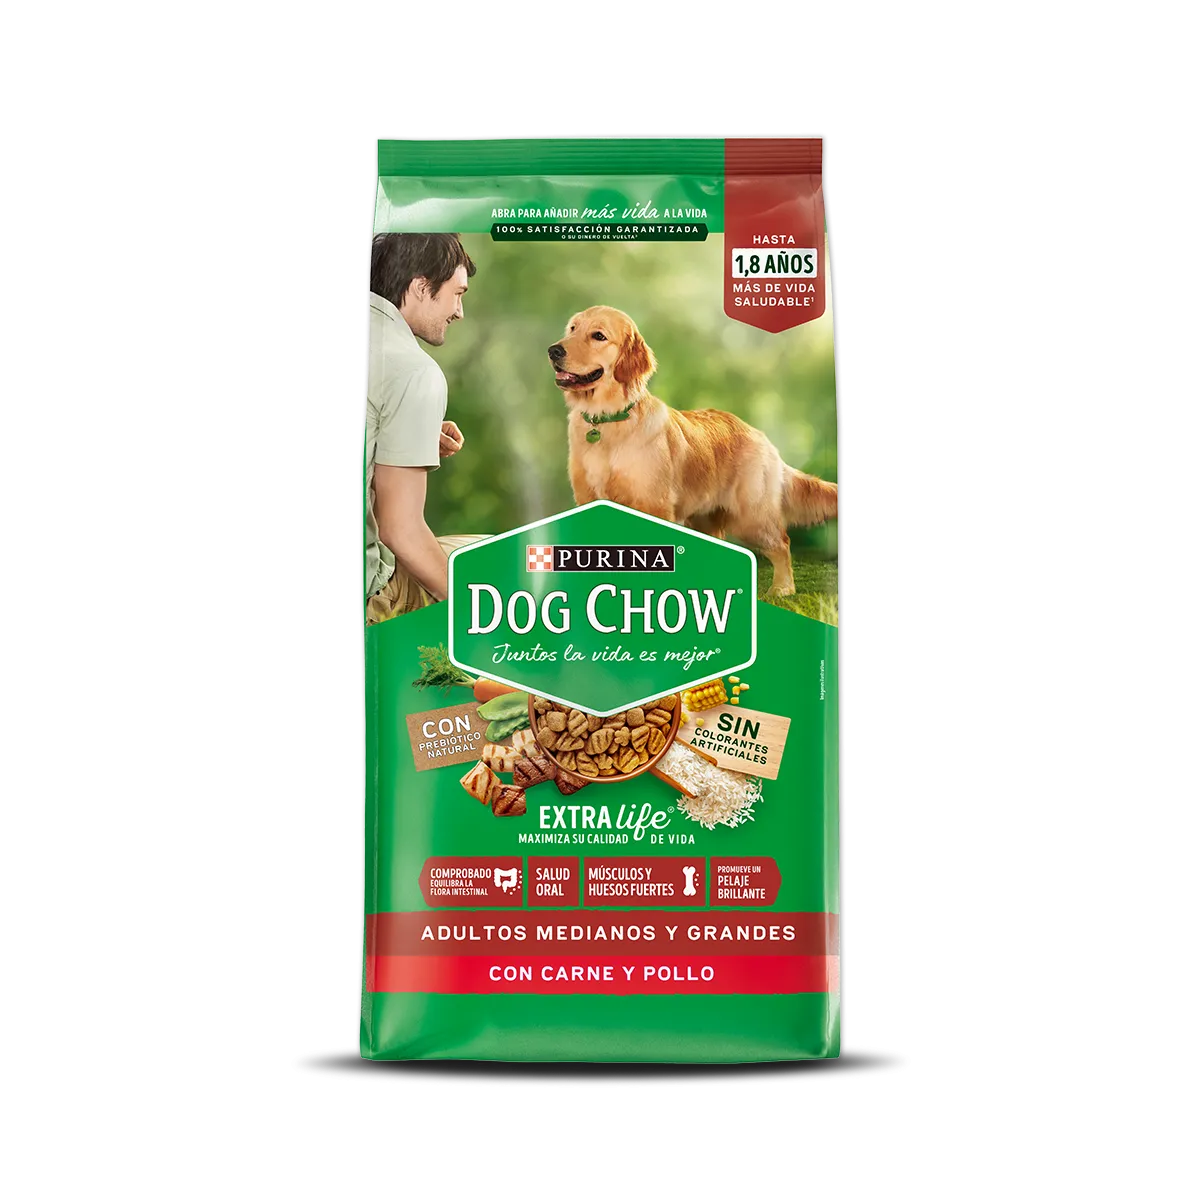 Purina-DogChow-adultos-colombia_0.png.webp